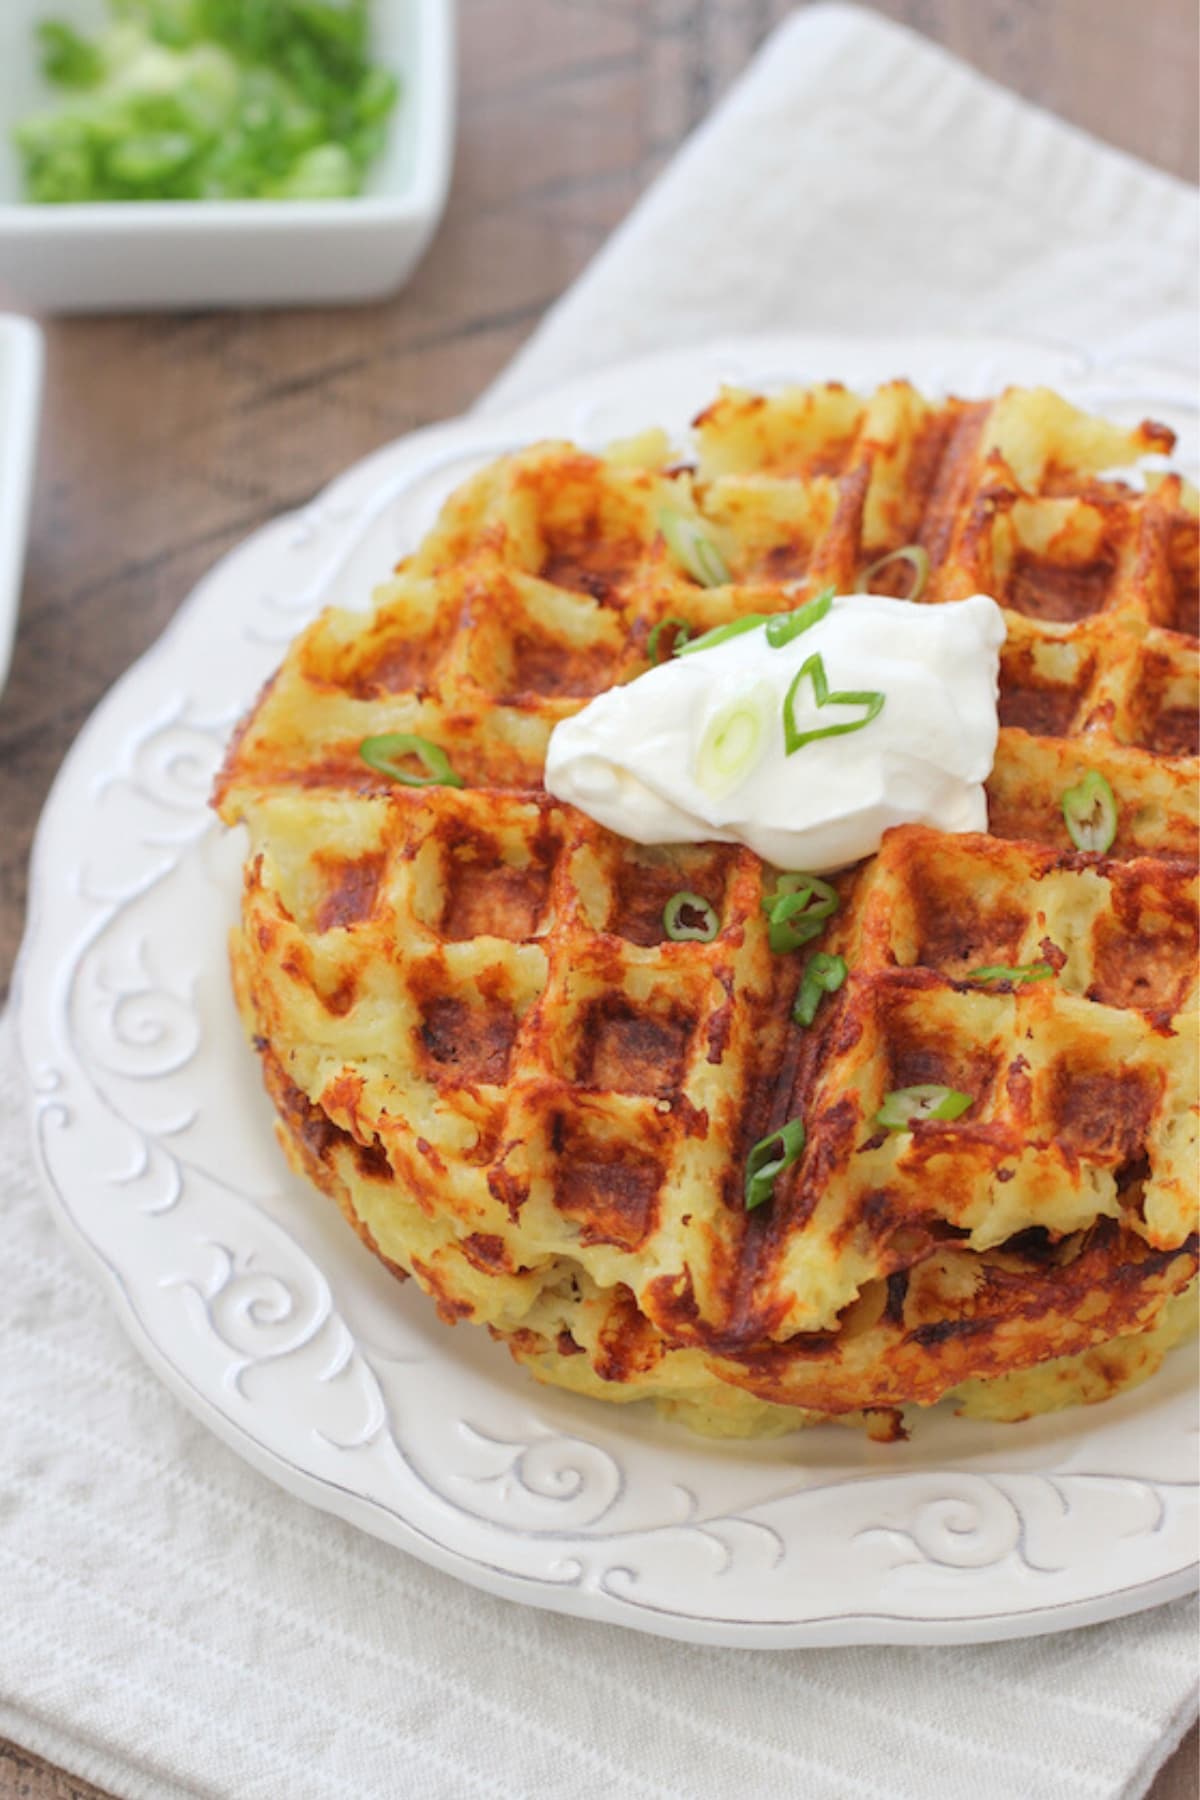 The Absolute Best Uses For Your Waffle Iron